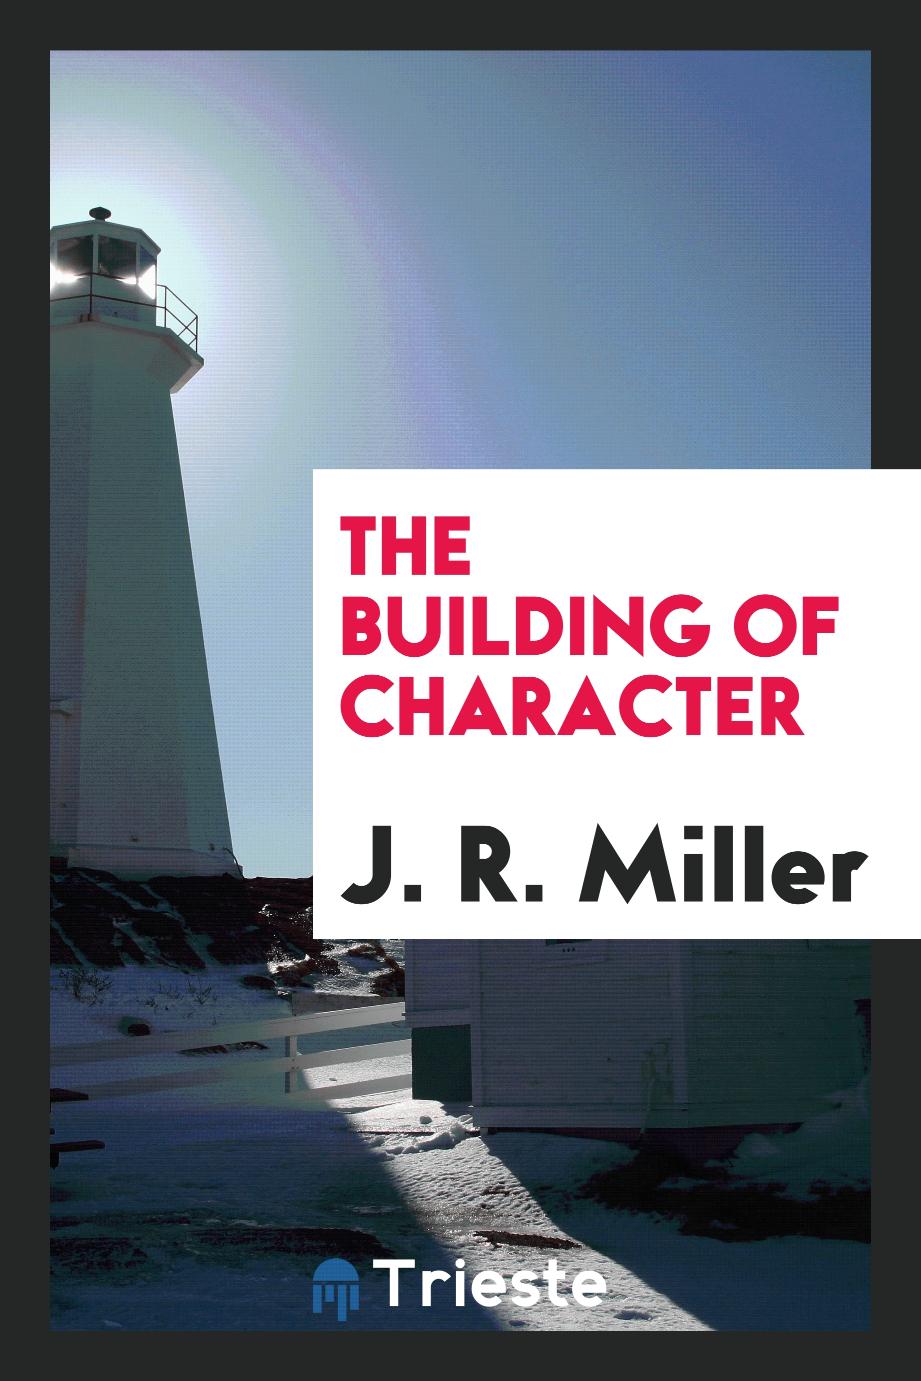 The building of character